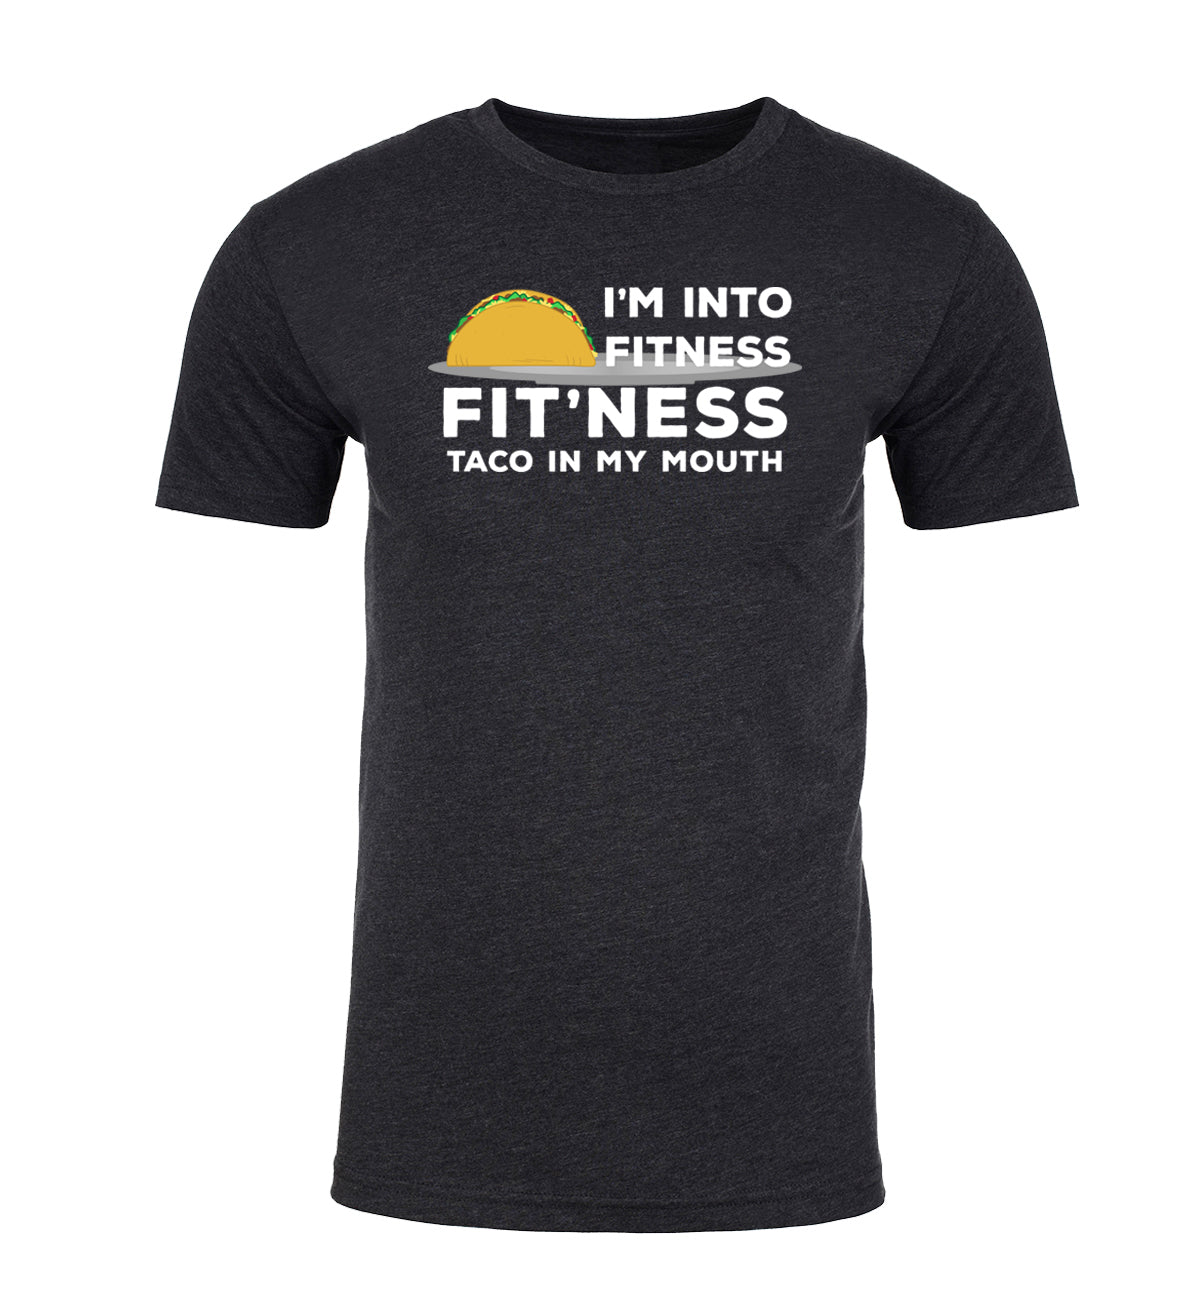 I'm Into Fitness - Fit'ness Taco in My Mouth - Unisex T Shirts - Mato & Hash